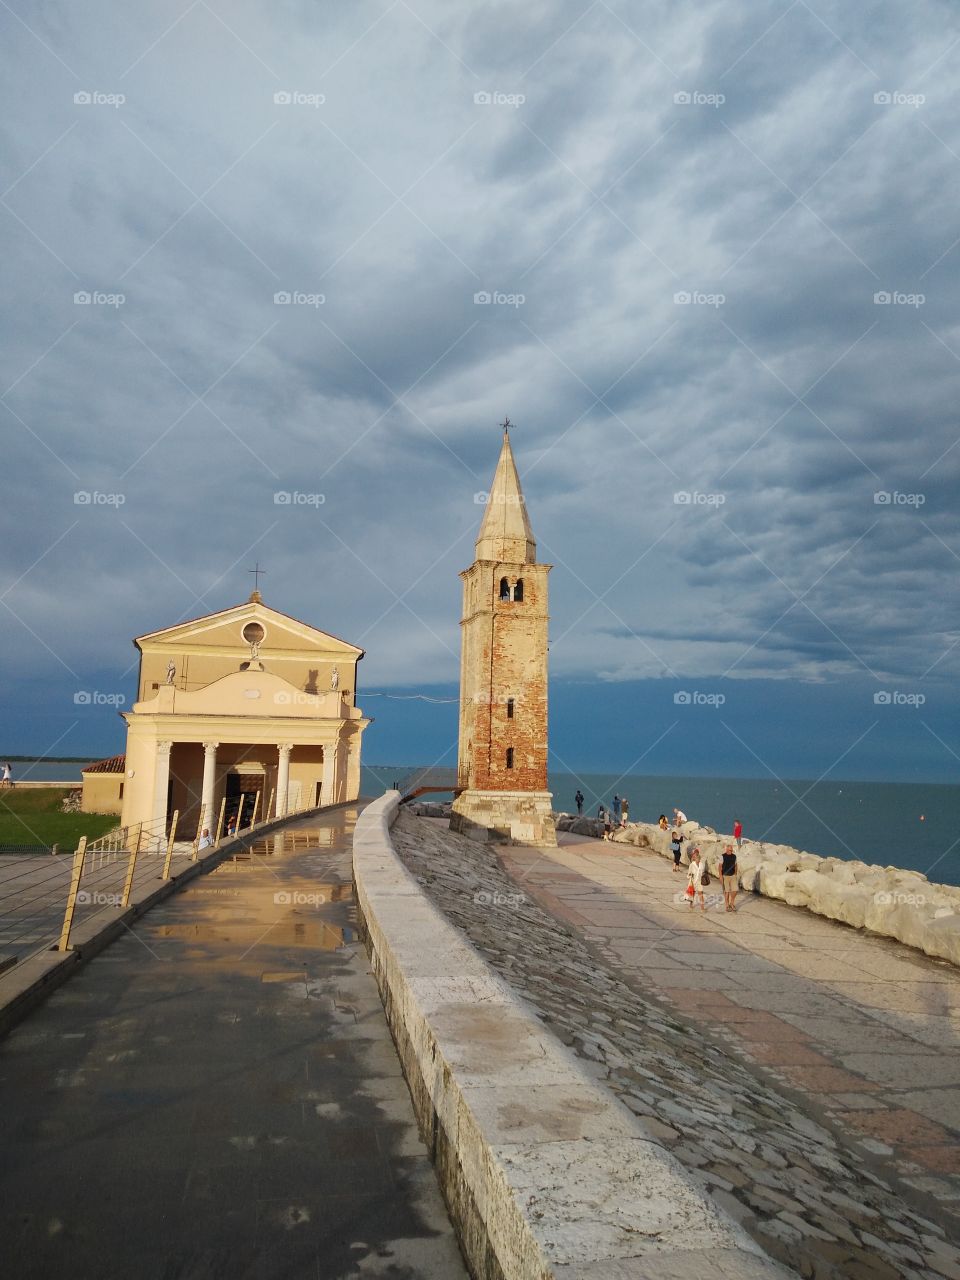 a panoramic view of caorle venice italy madonna dell angelo church and lighthouse bell tower at city seafront rock